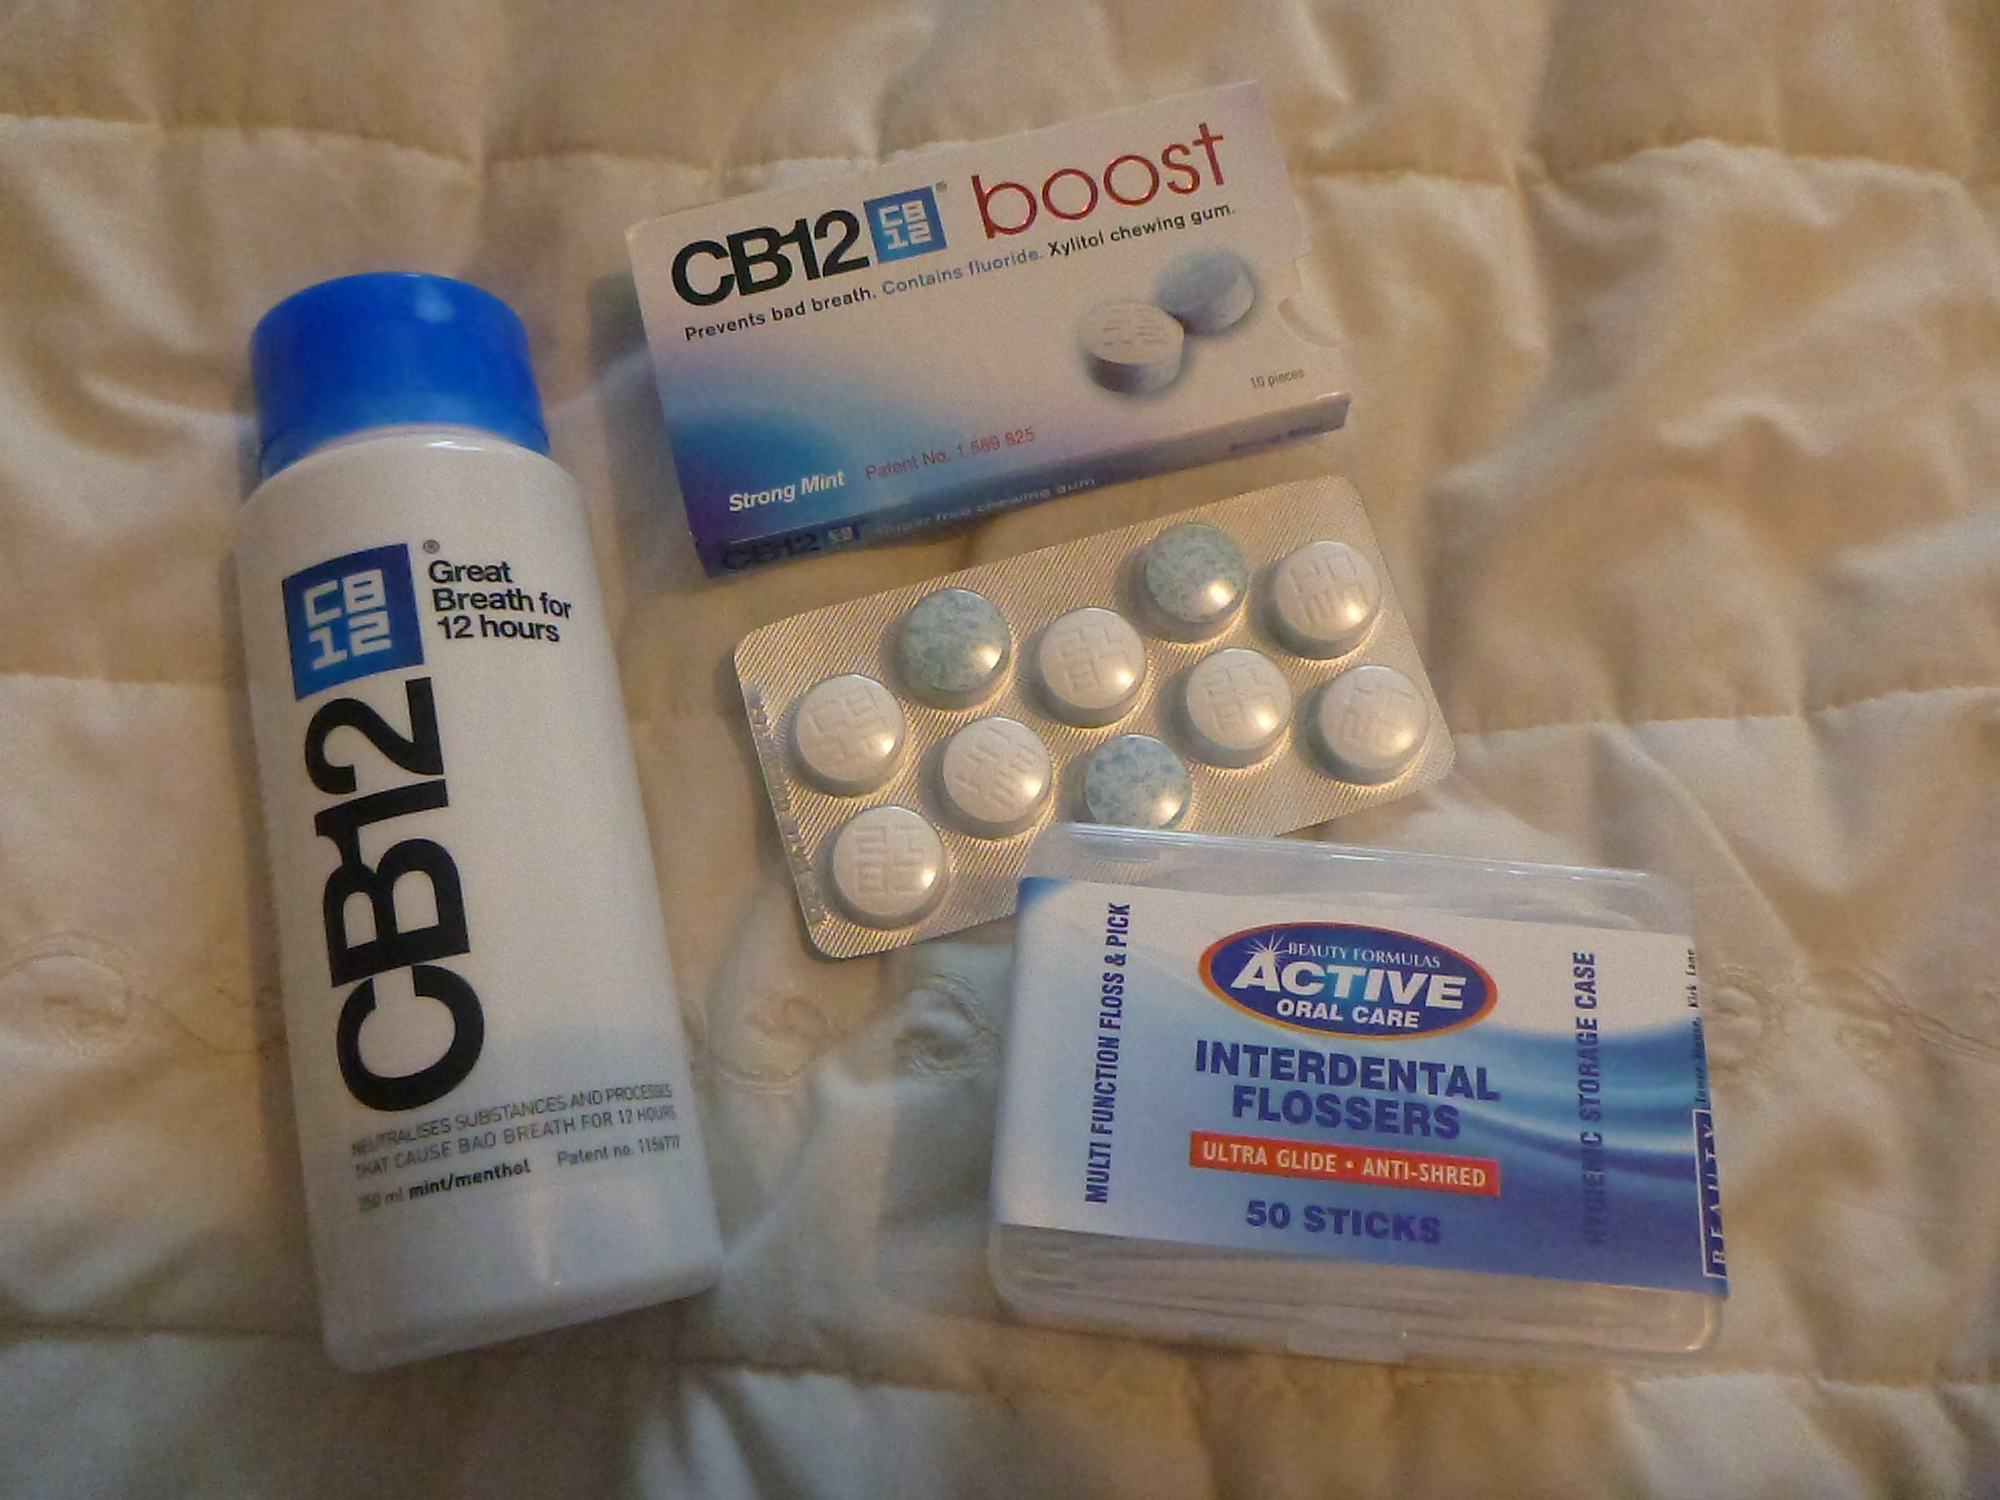 Tuesday's Travel Essentials: Taking The #CB12testdays Challenge with my New Mouthwash - CB12!